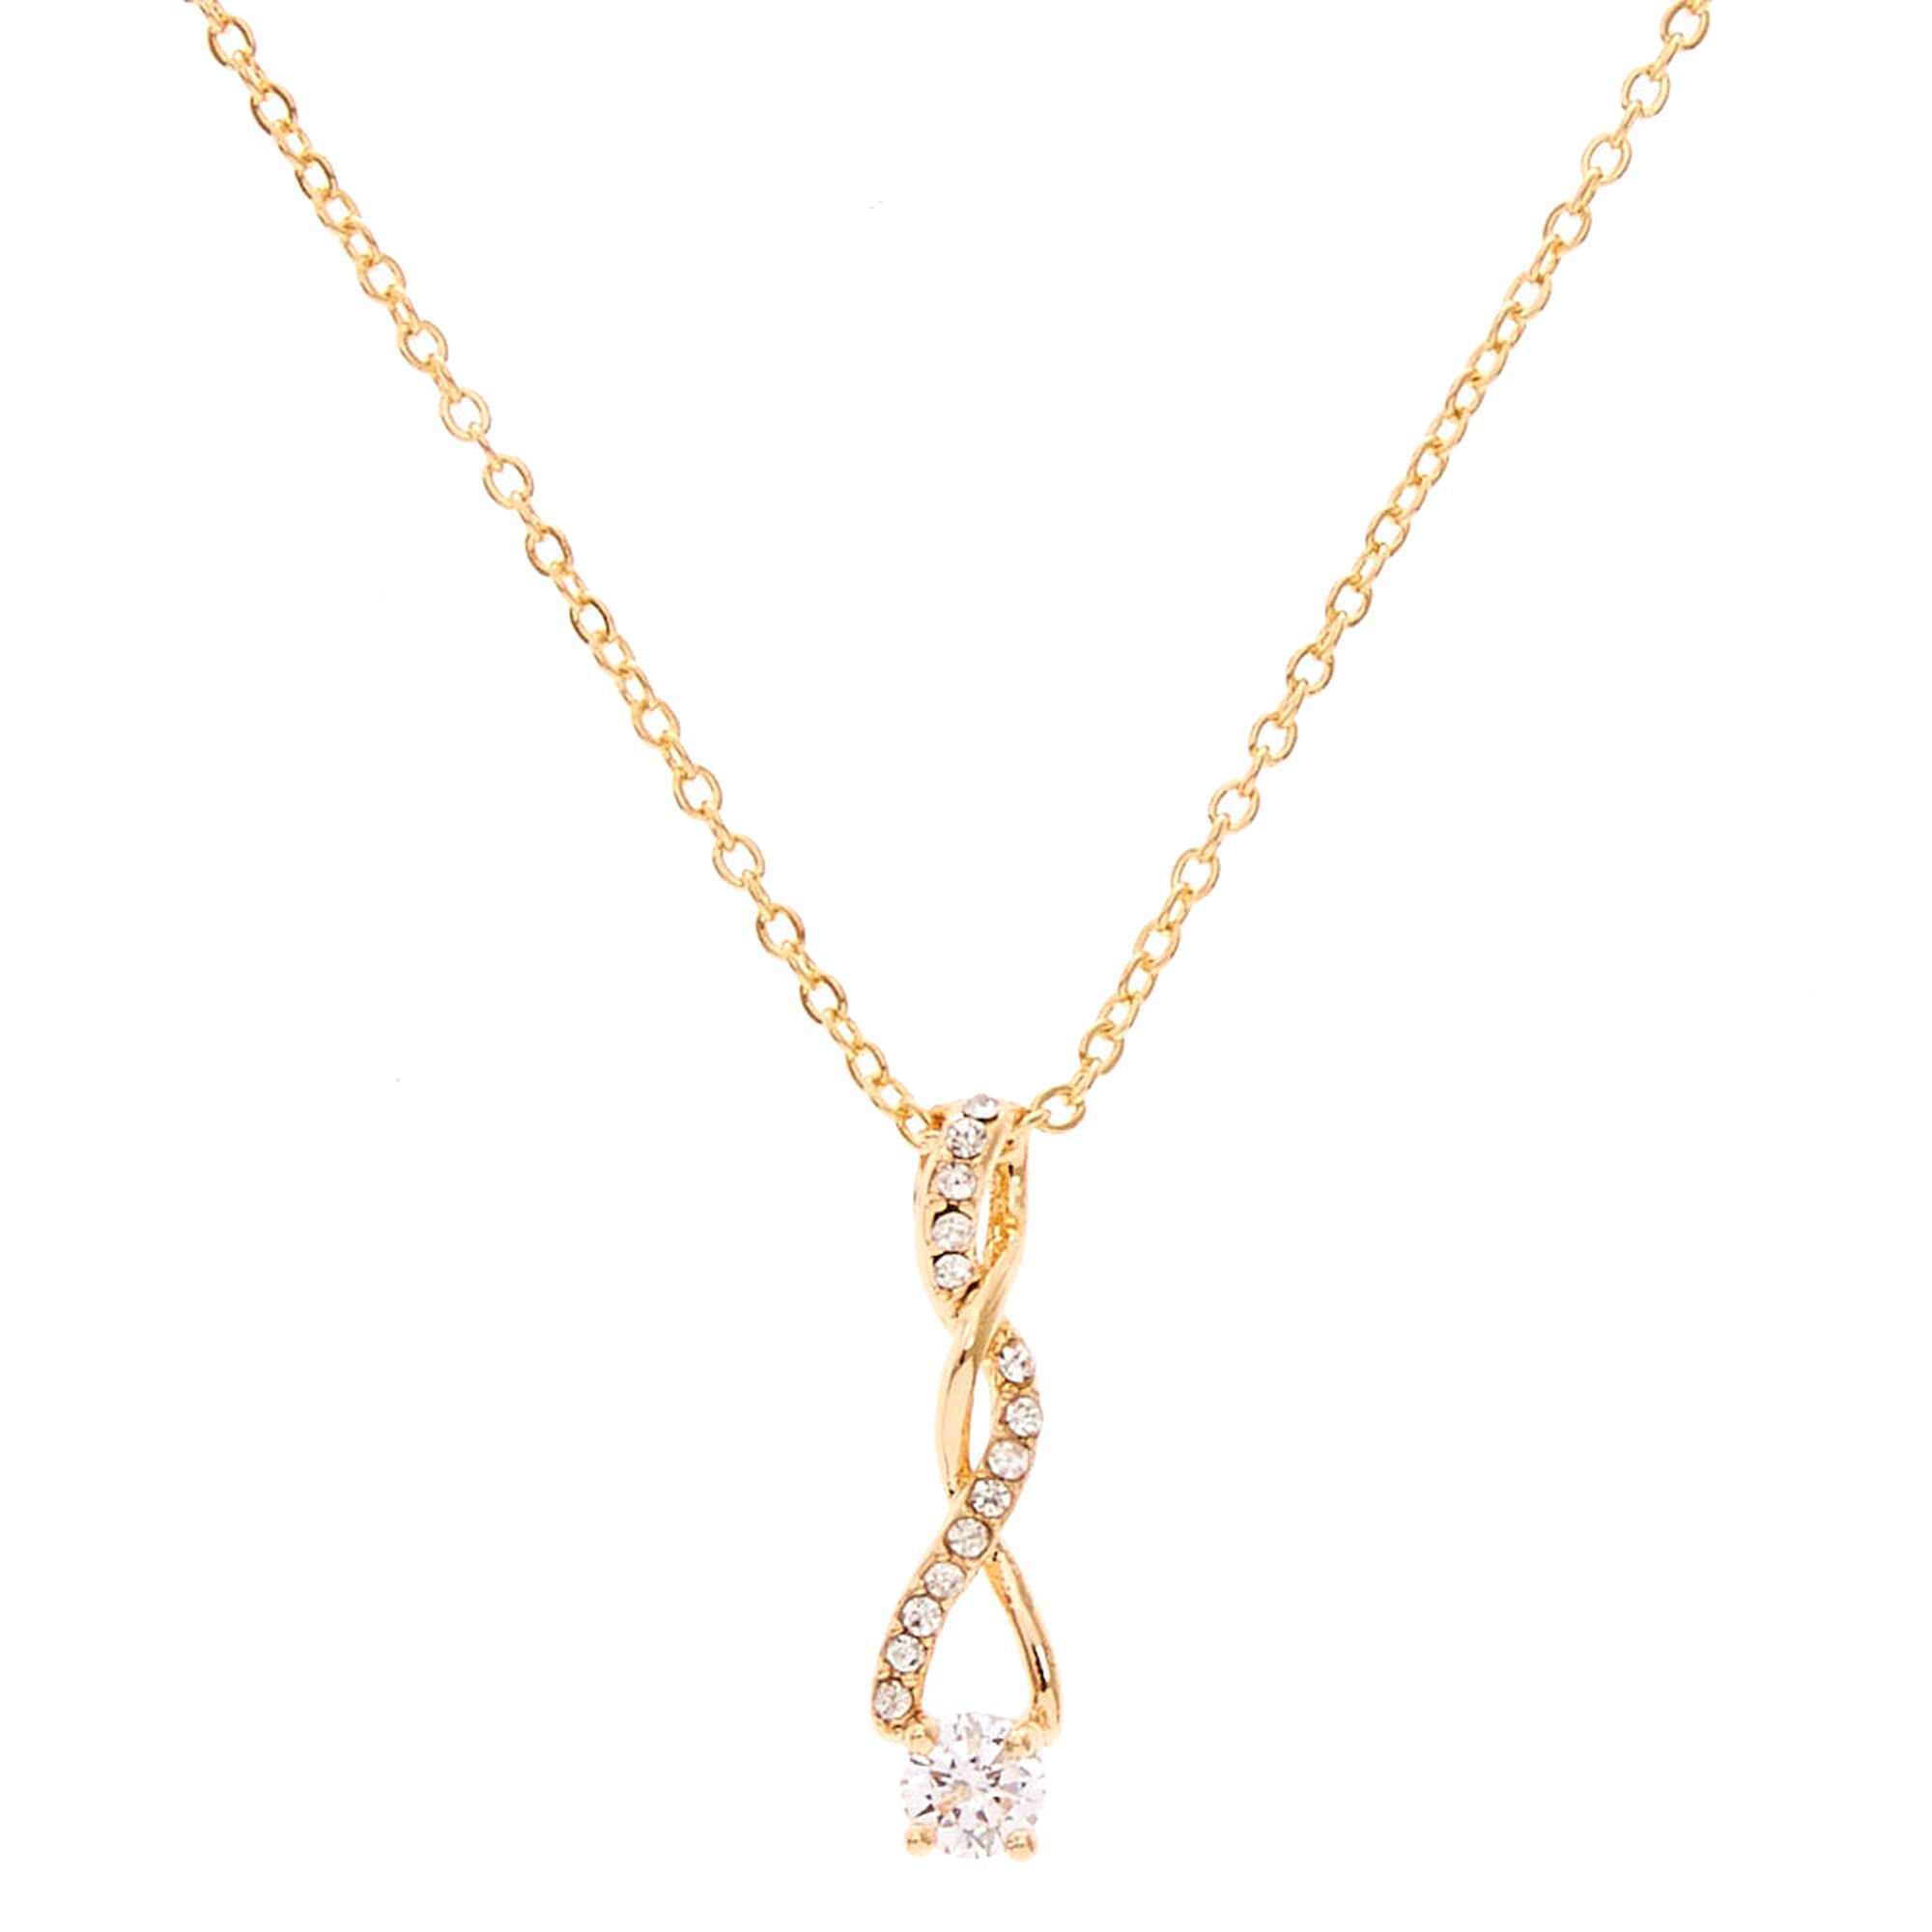 Gold Tone Cubic Zirconia Twisted Pendant Necklace | Icing US